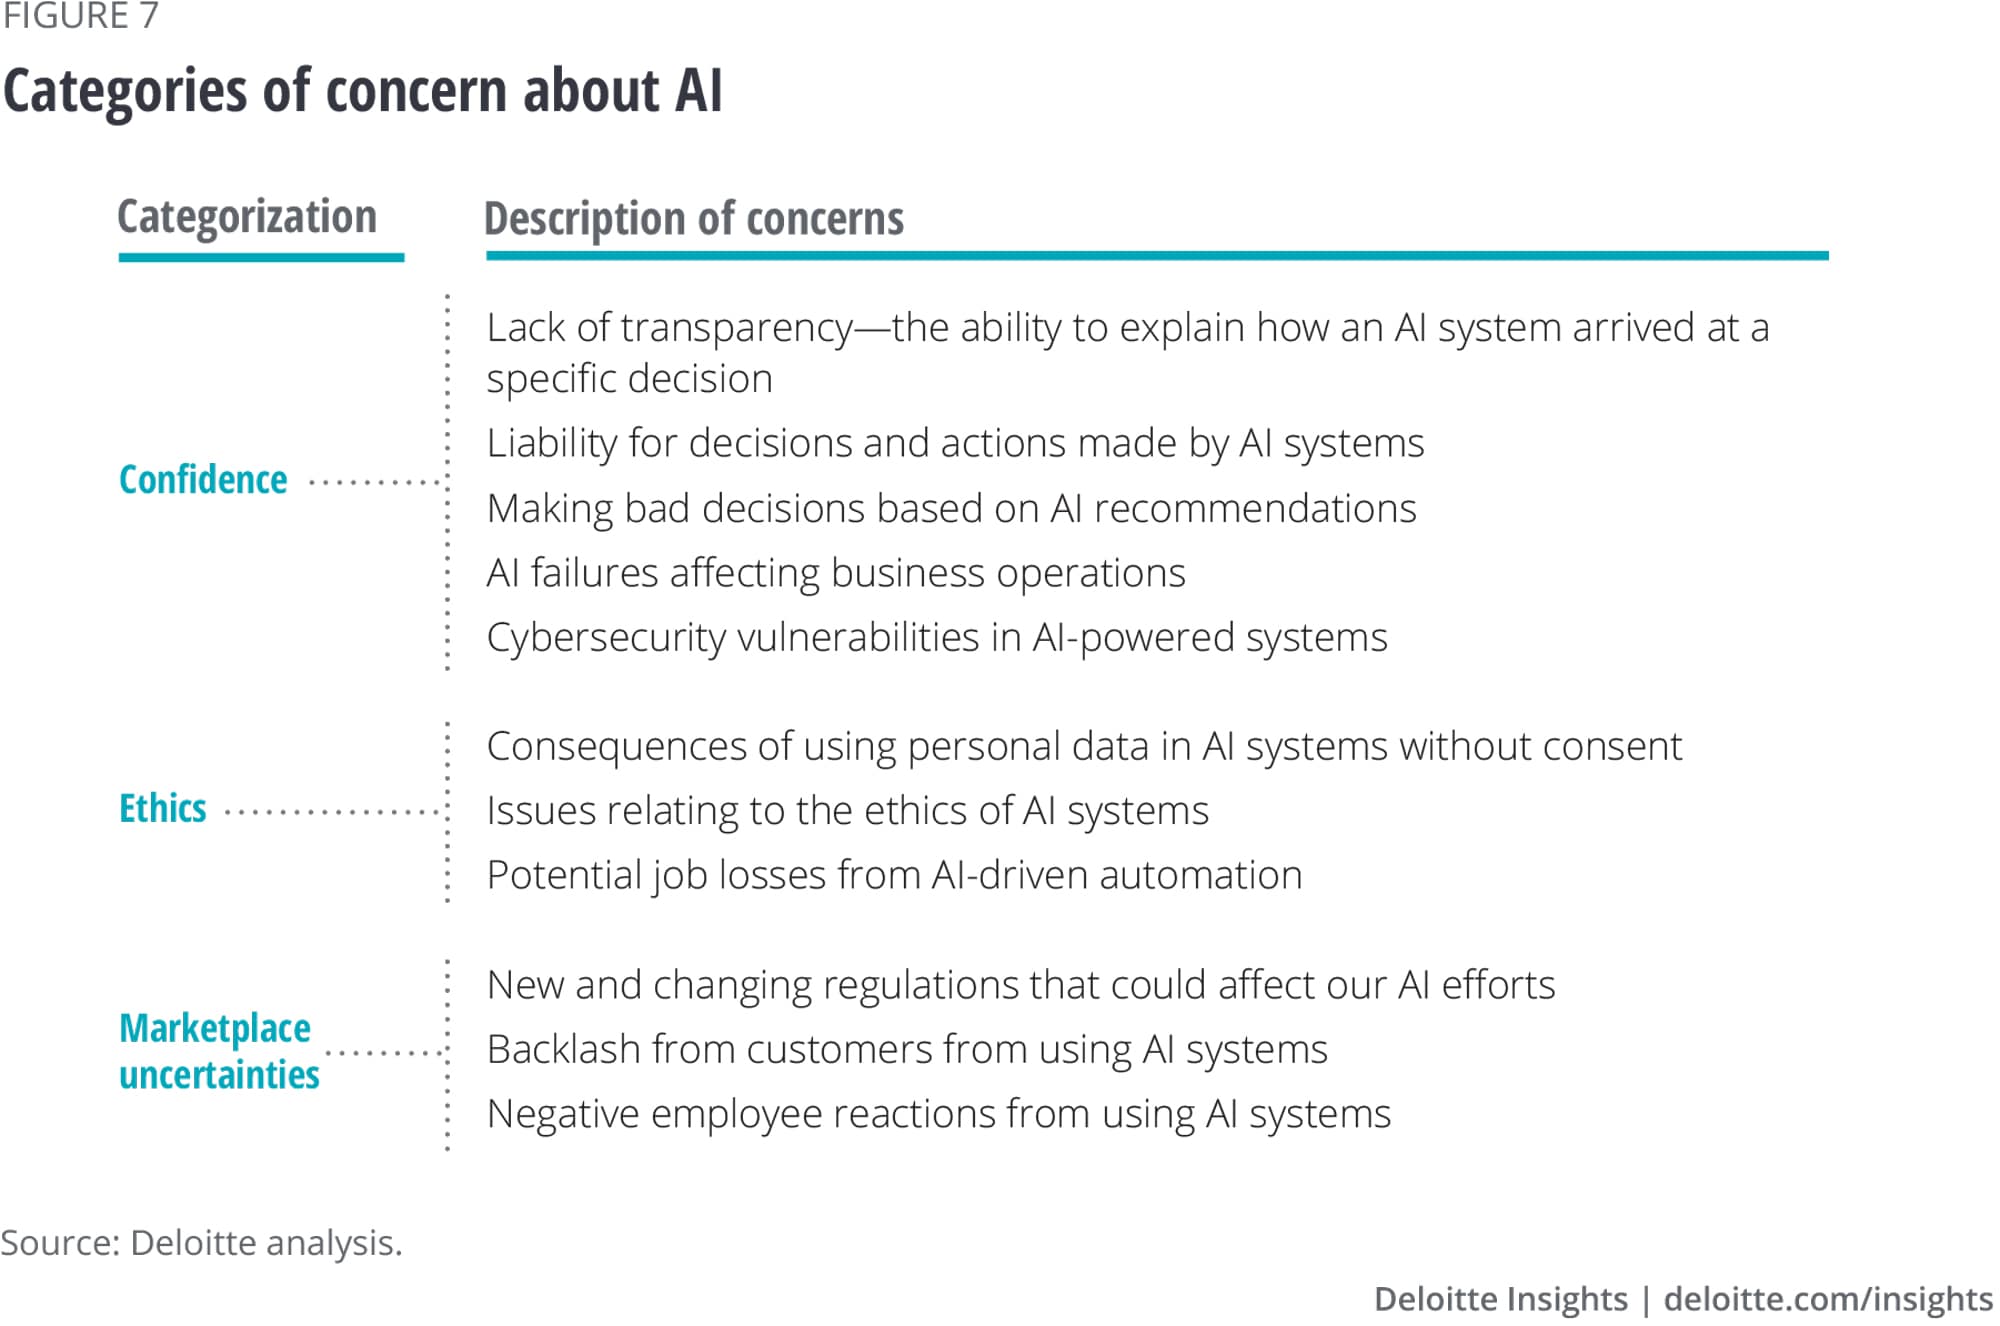 Categories of concern about AI